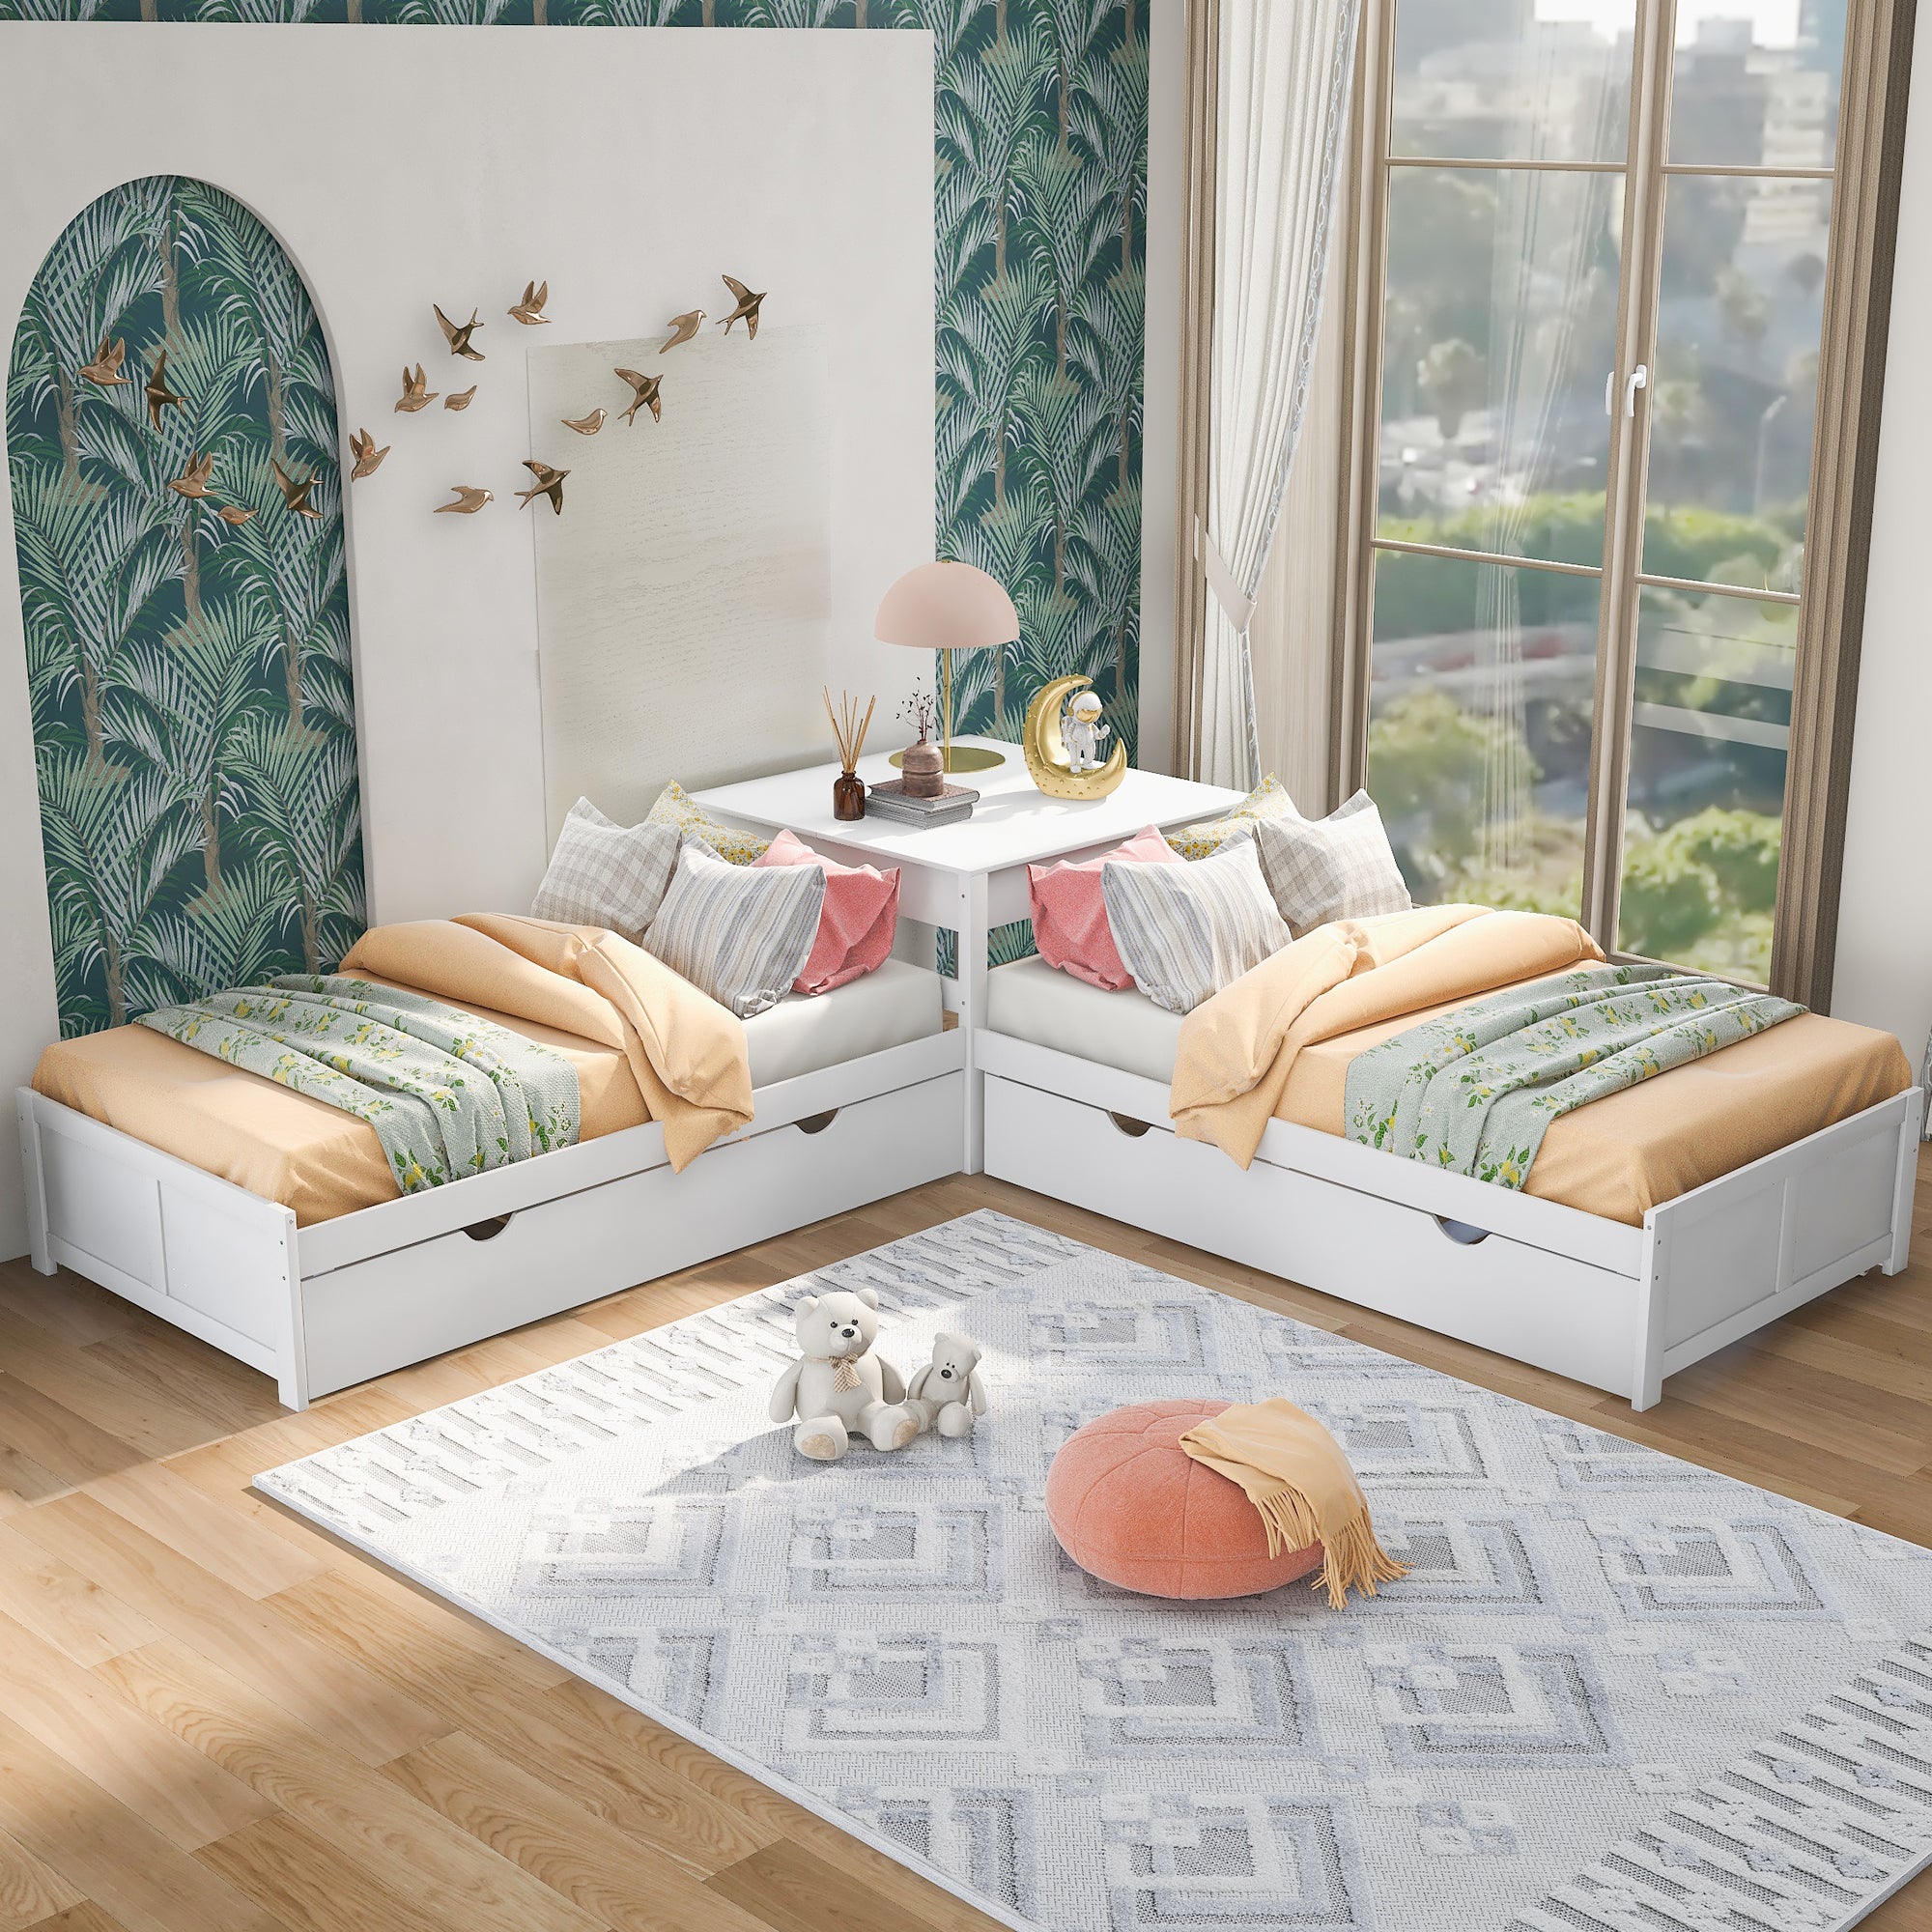 Twin Size L-shaped Platform Bed with Two Trundles and Built-in Square Table (White)